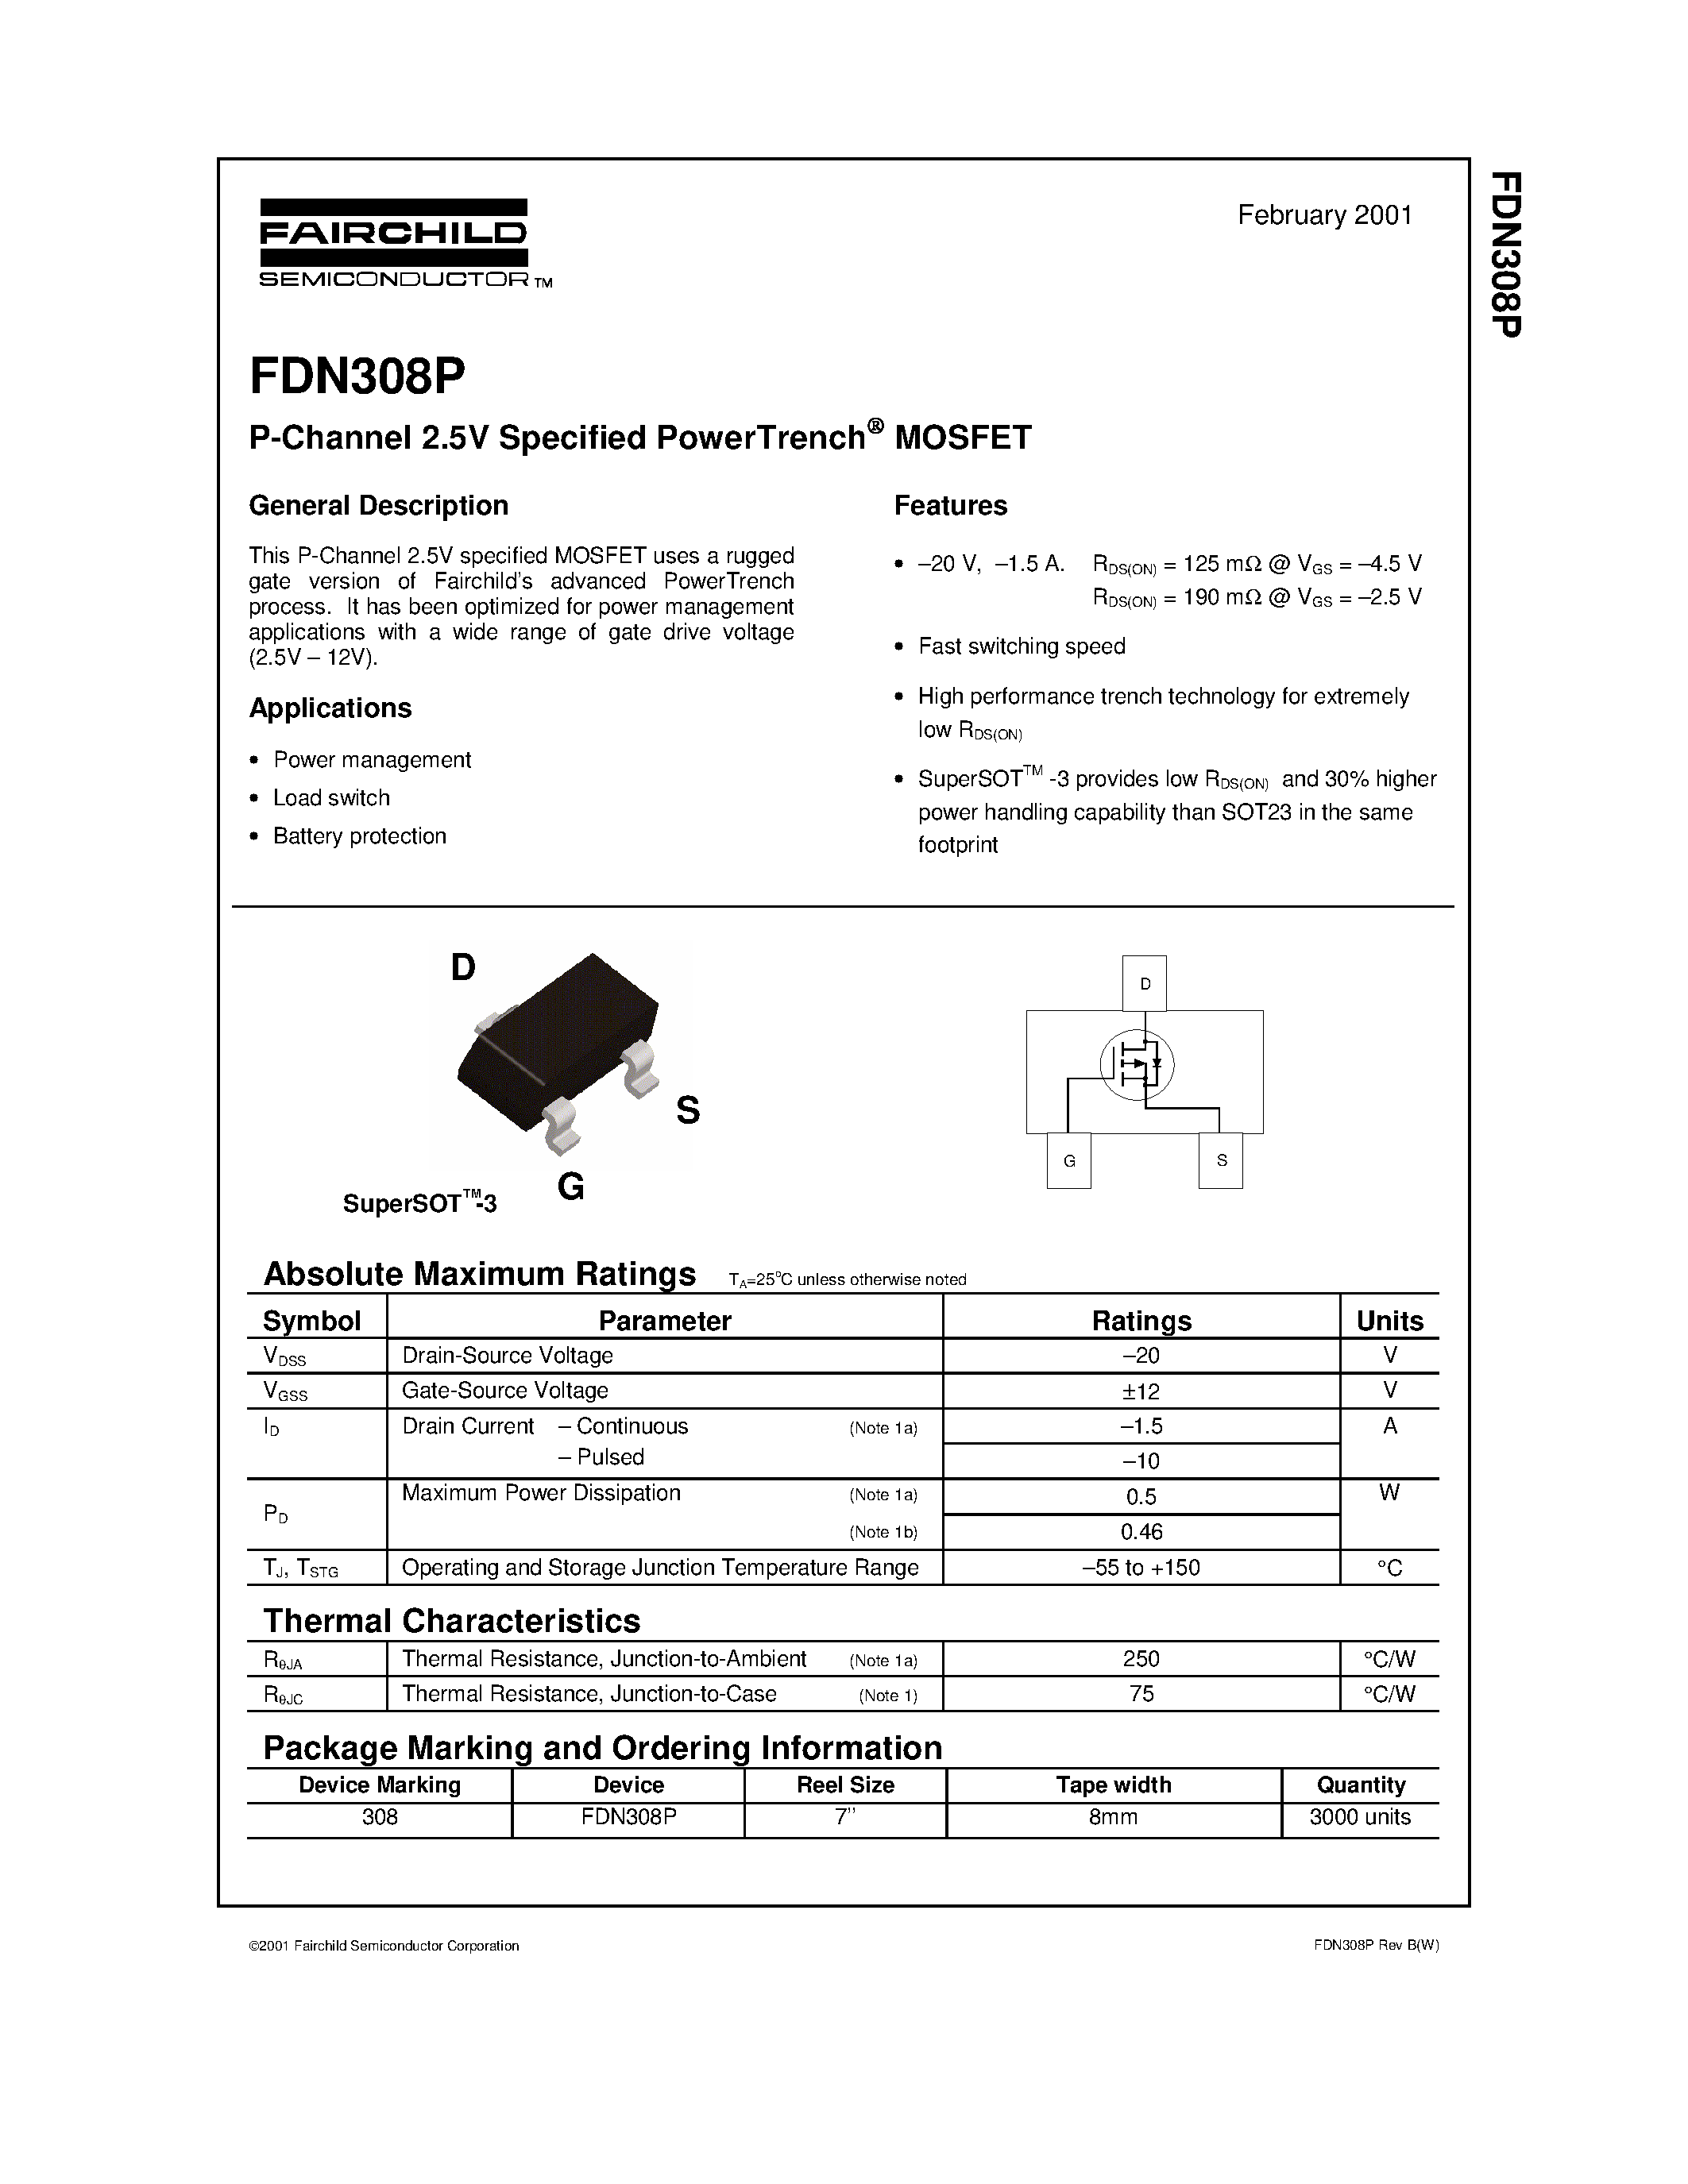 Datasheet FDN308P - P-Channel 2.5V Specified PowerTrench MOSFET page 1